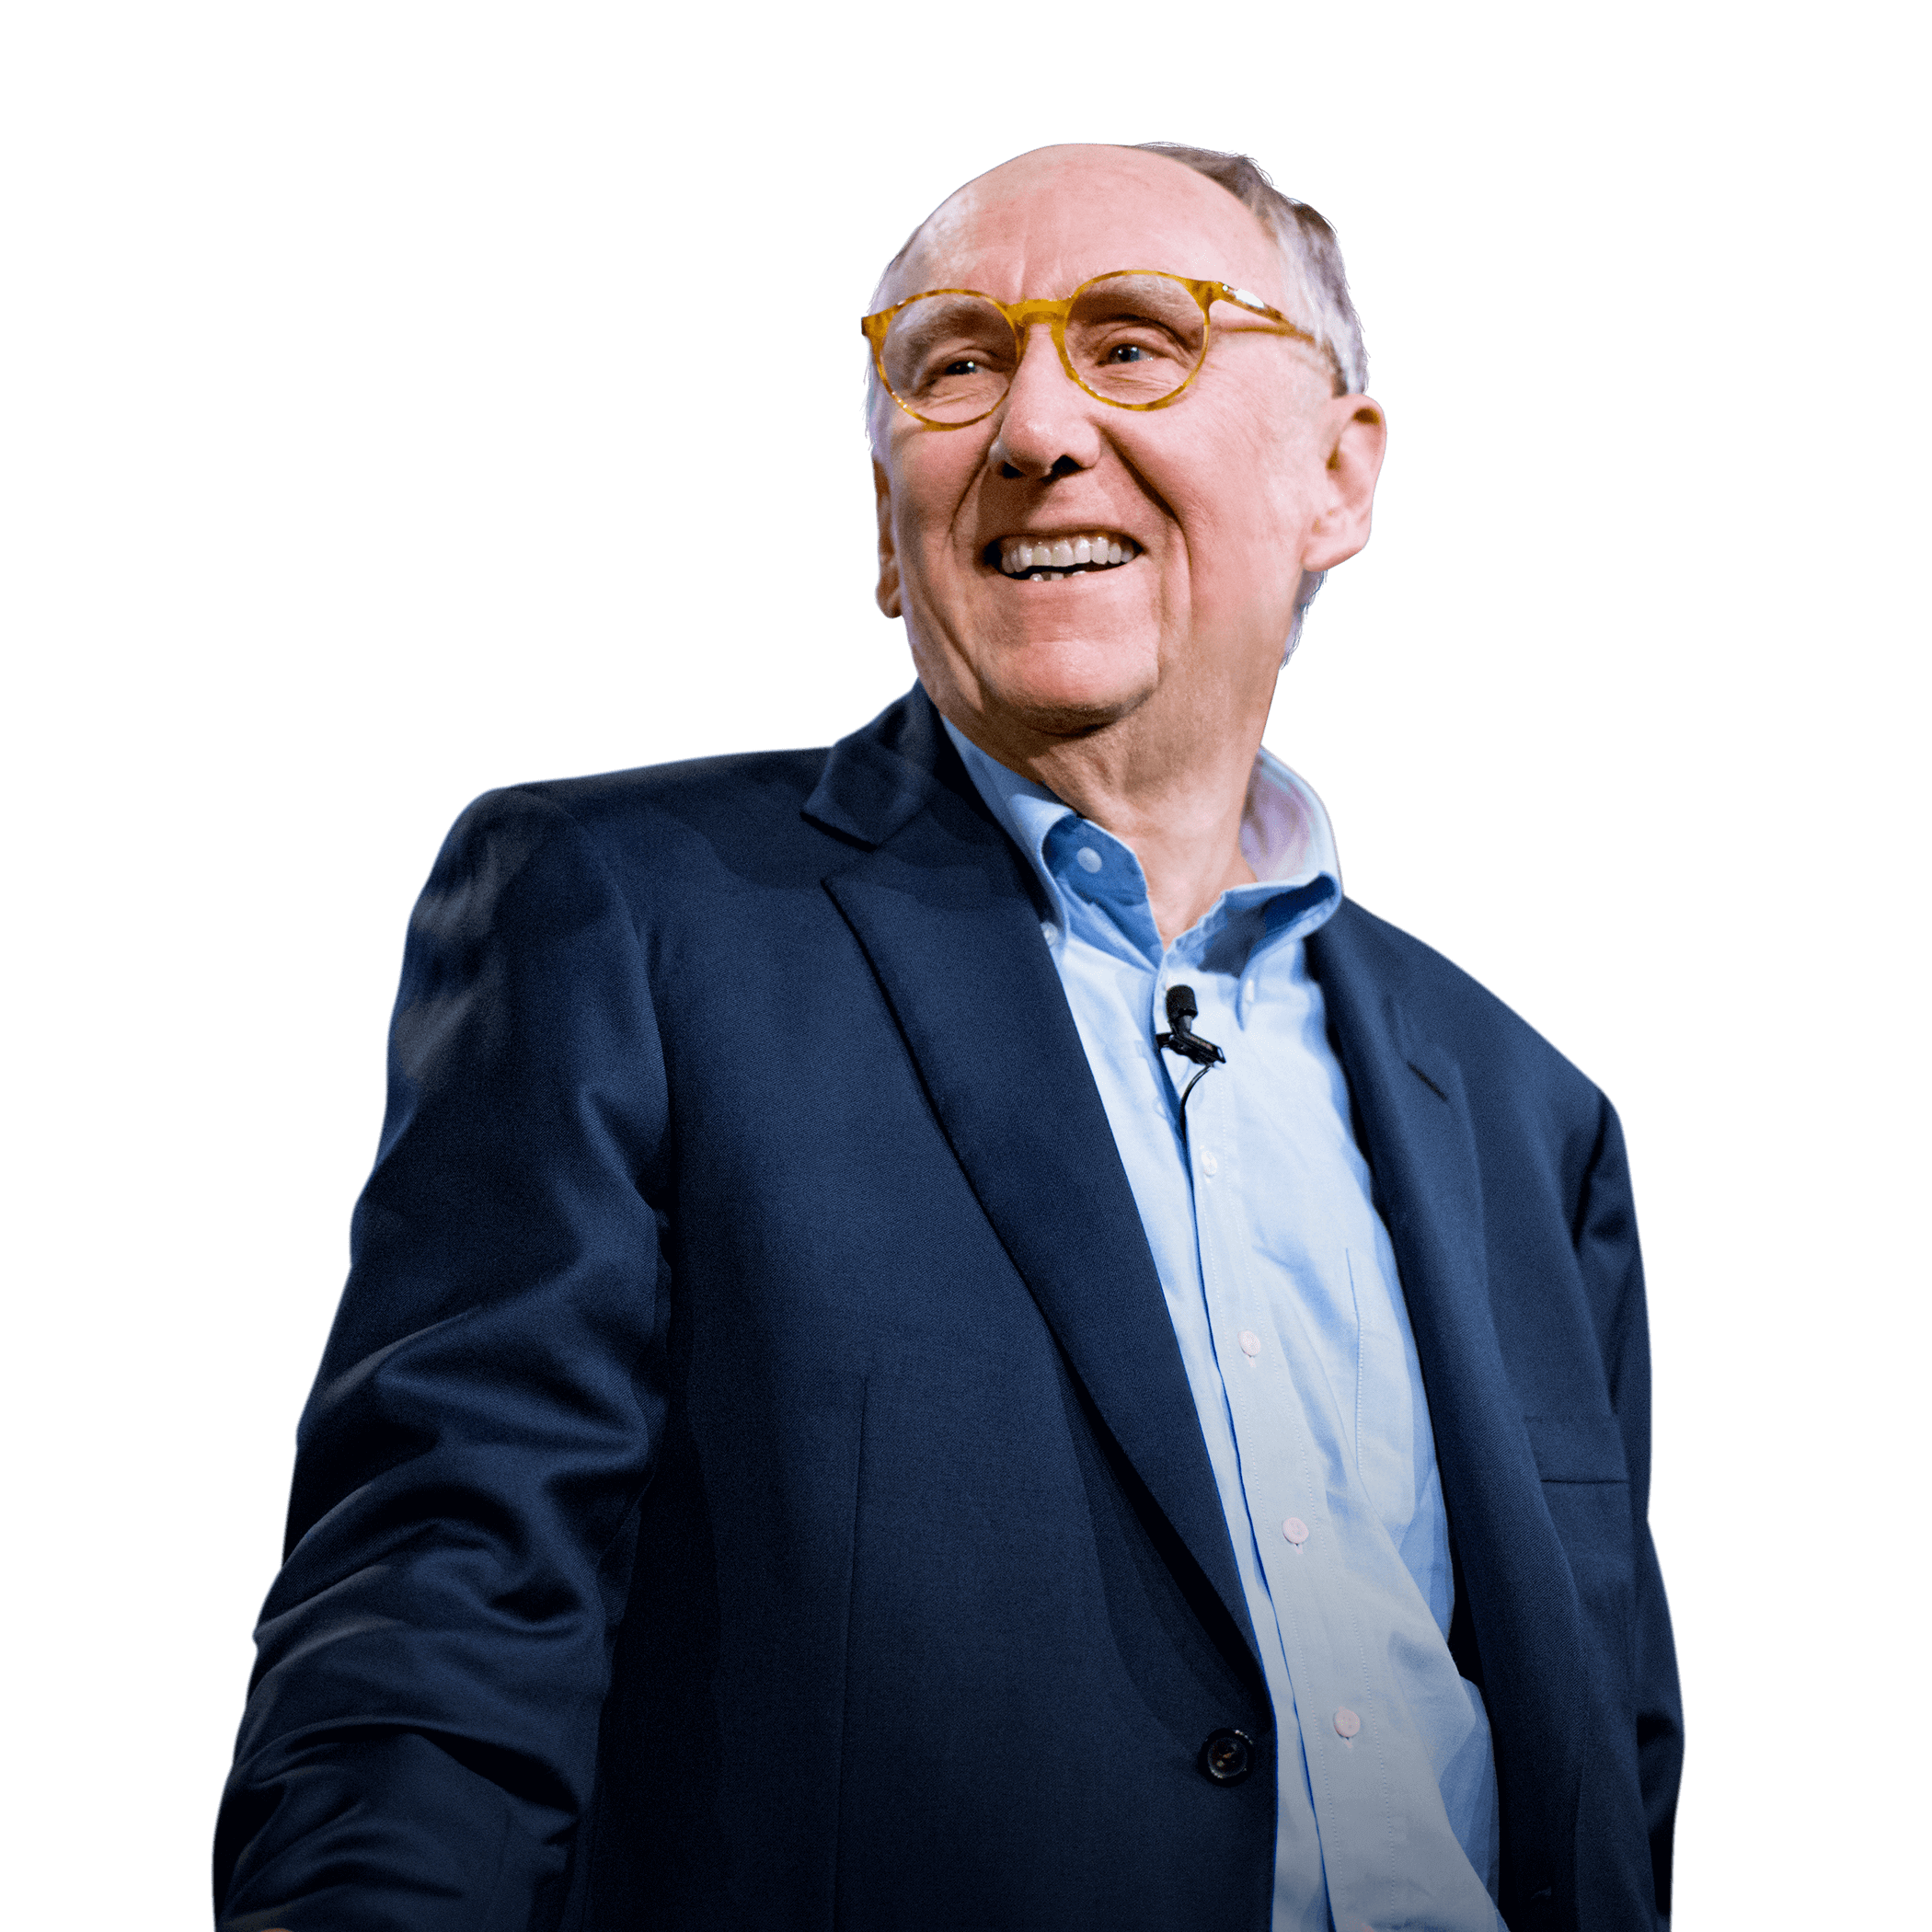 Jack Dangermond, Esri President, looking in the distance smiling